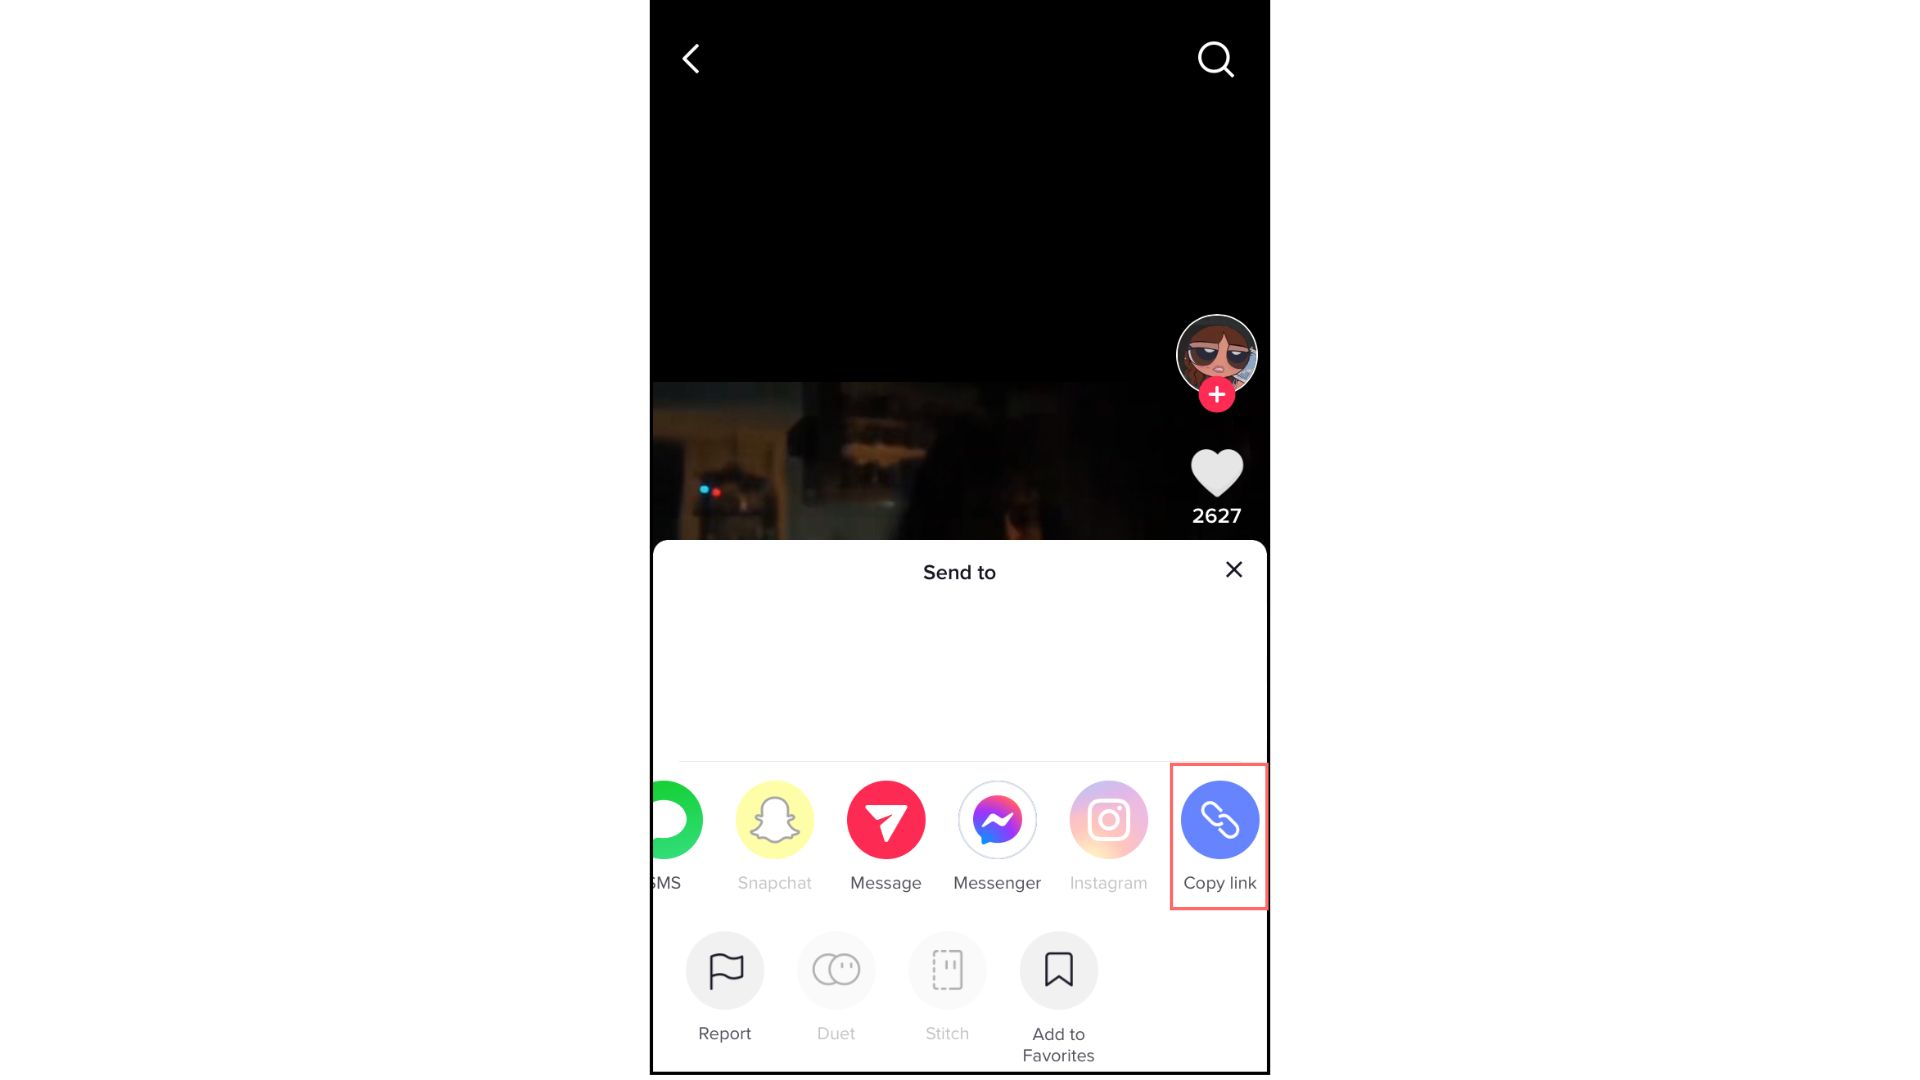 How to Make a TikTok Sound Your Ringtone/Alarm on Android/iPhone